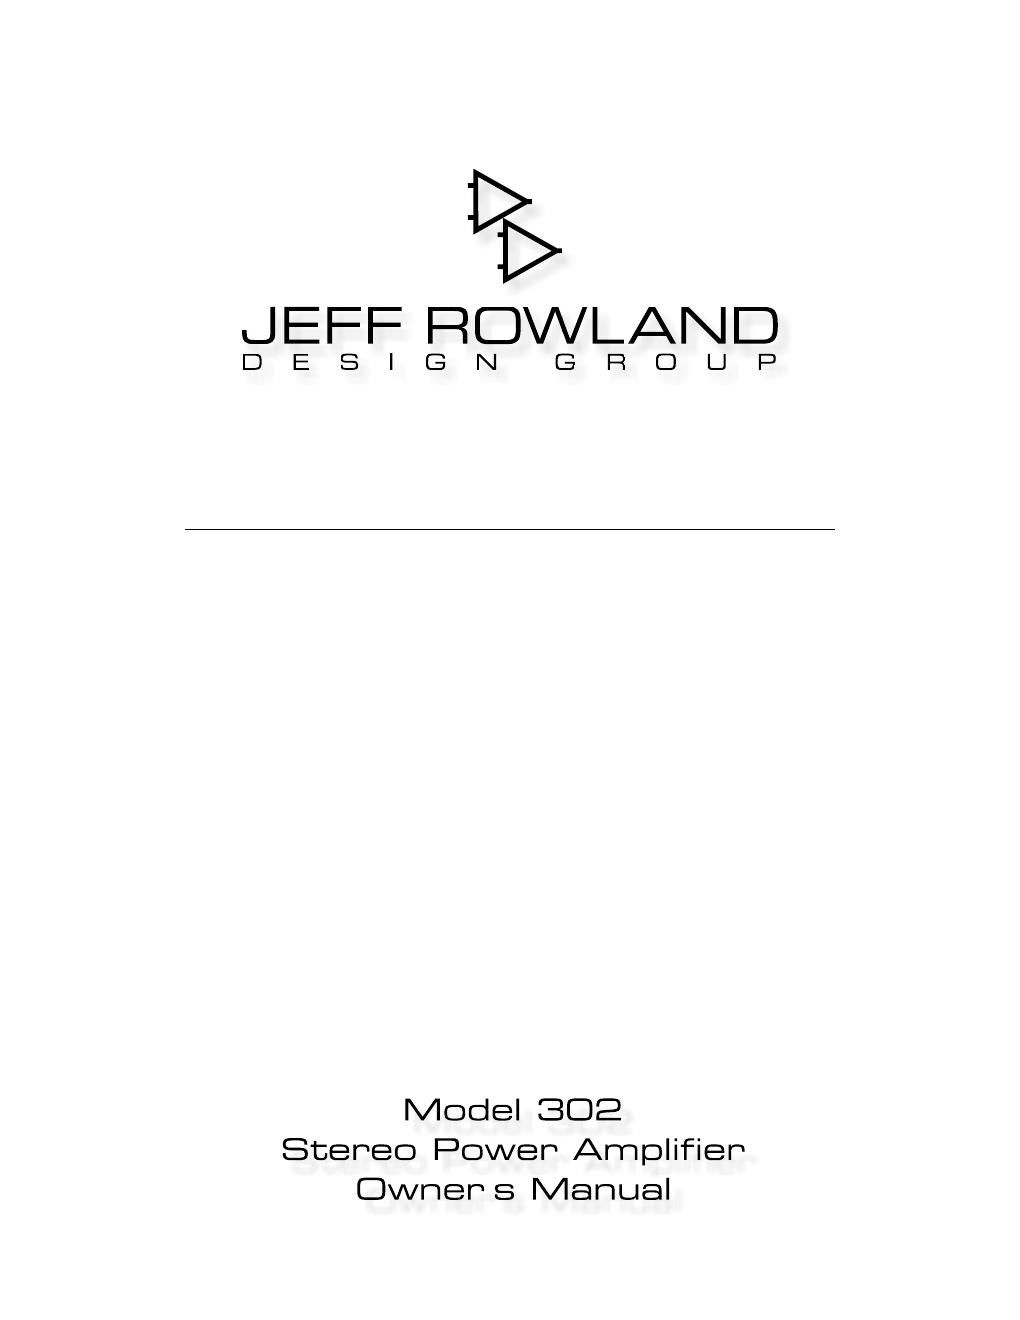 jeff rowland m 302 owners manual